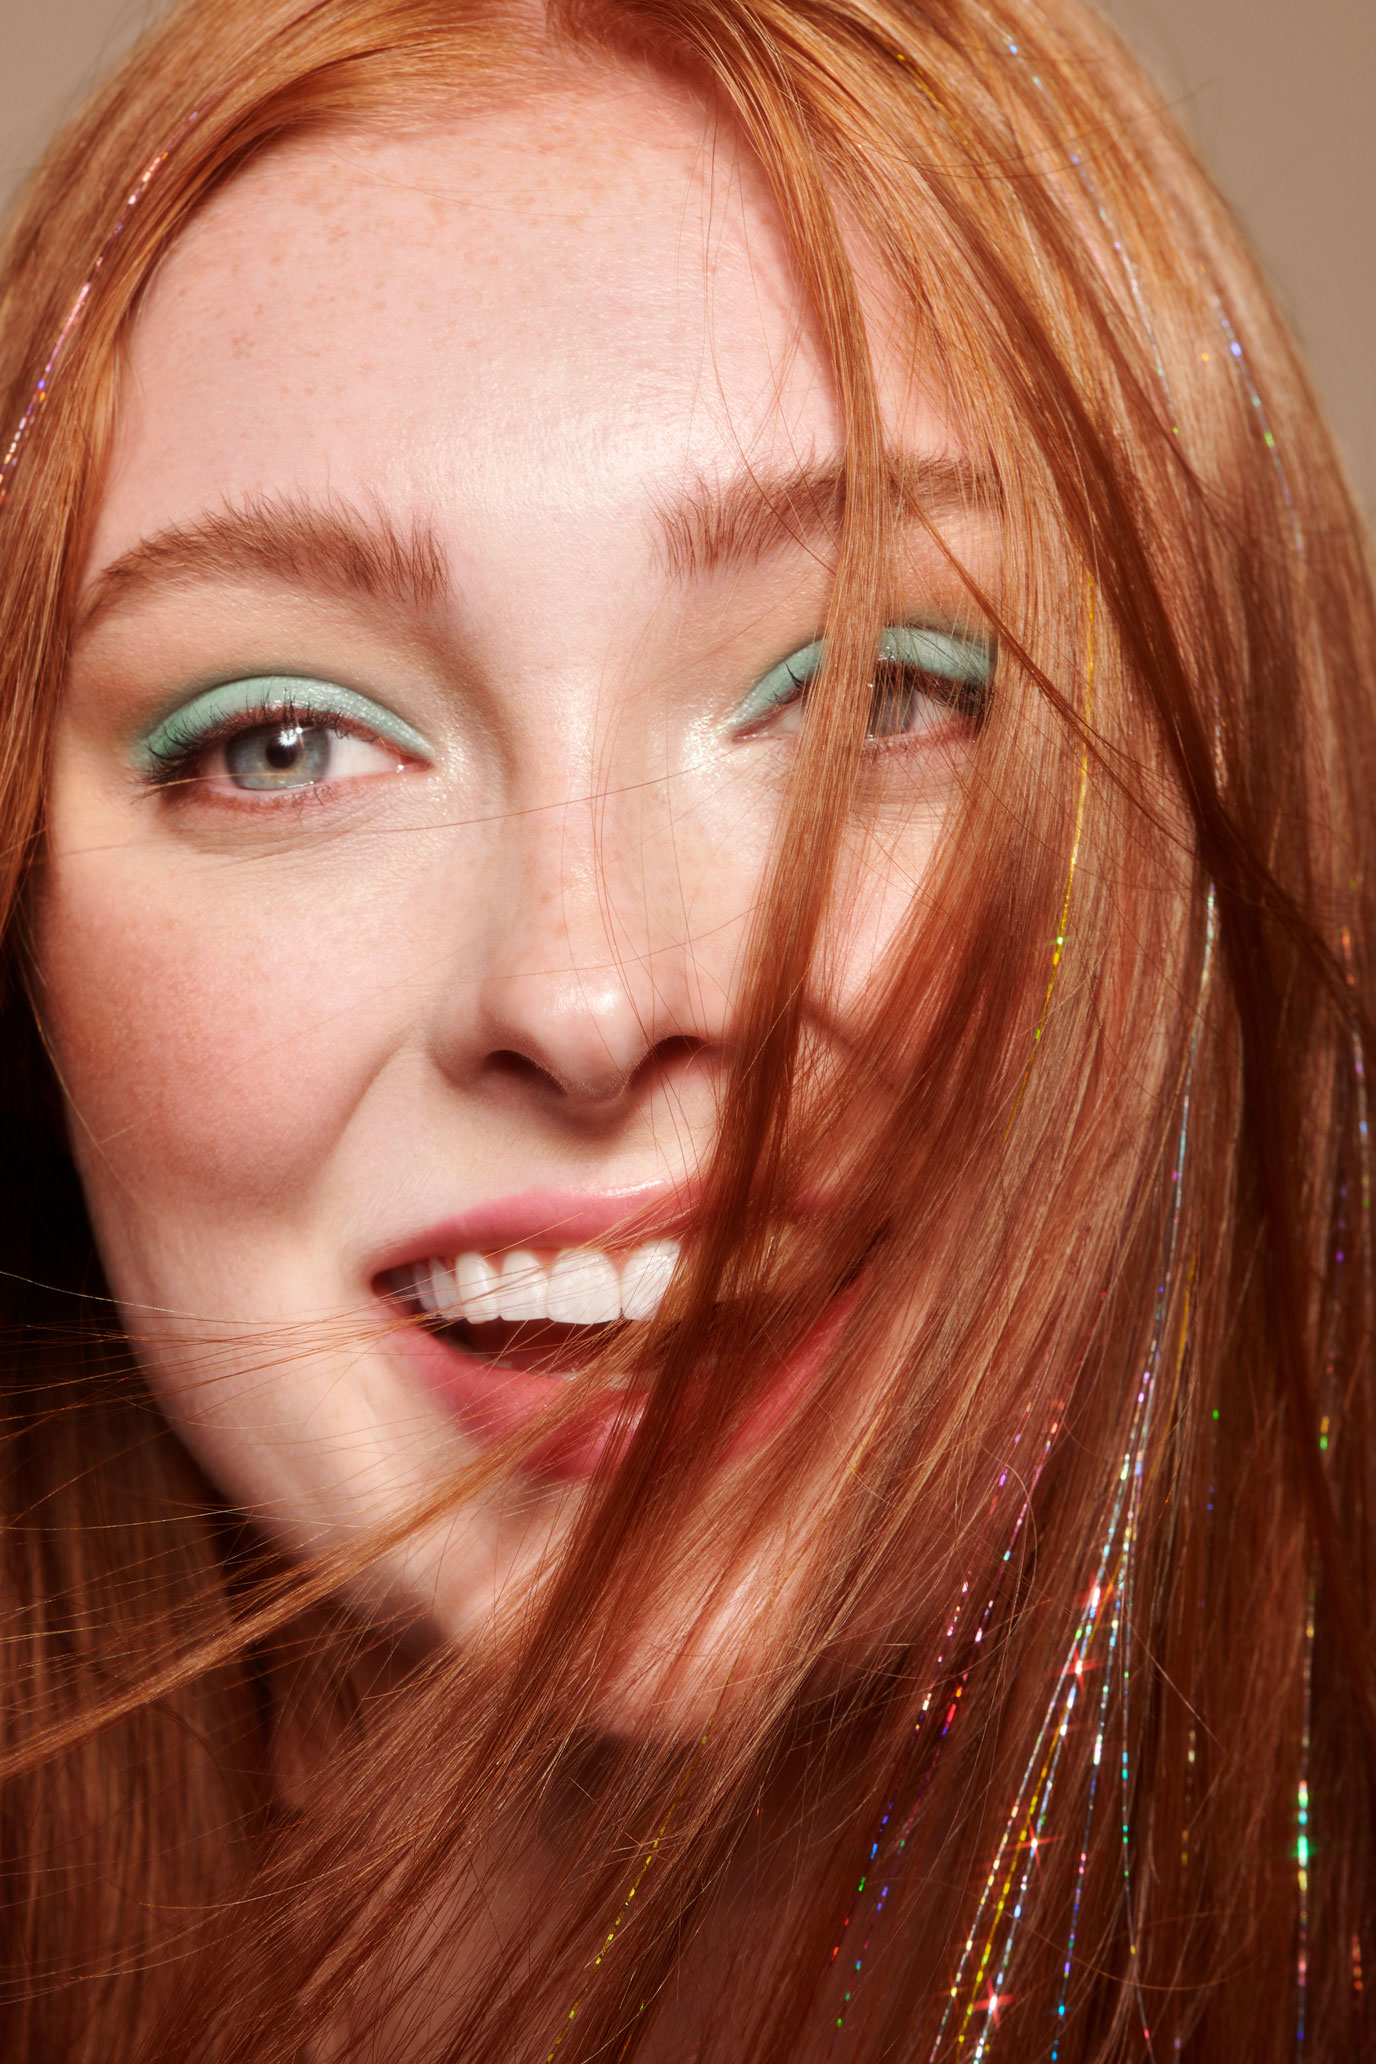 Tight portrait of female model with tinsel-streaked red hair and mint eyeshadow